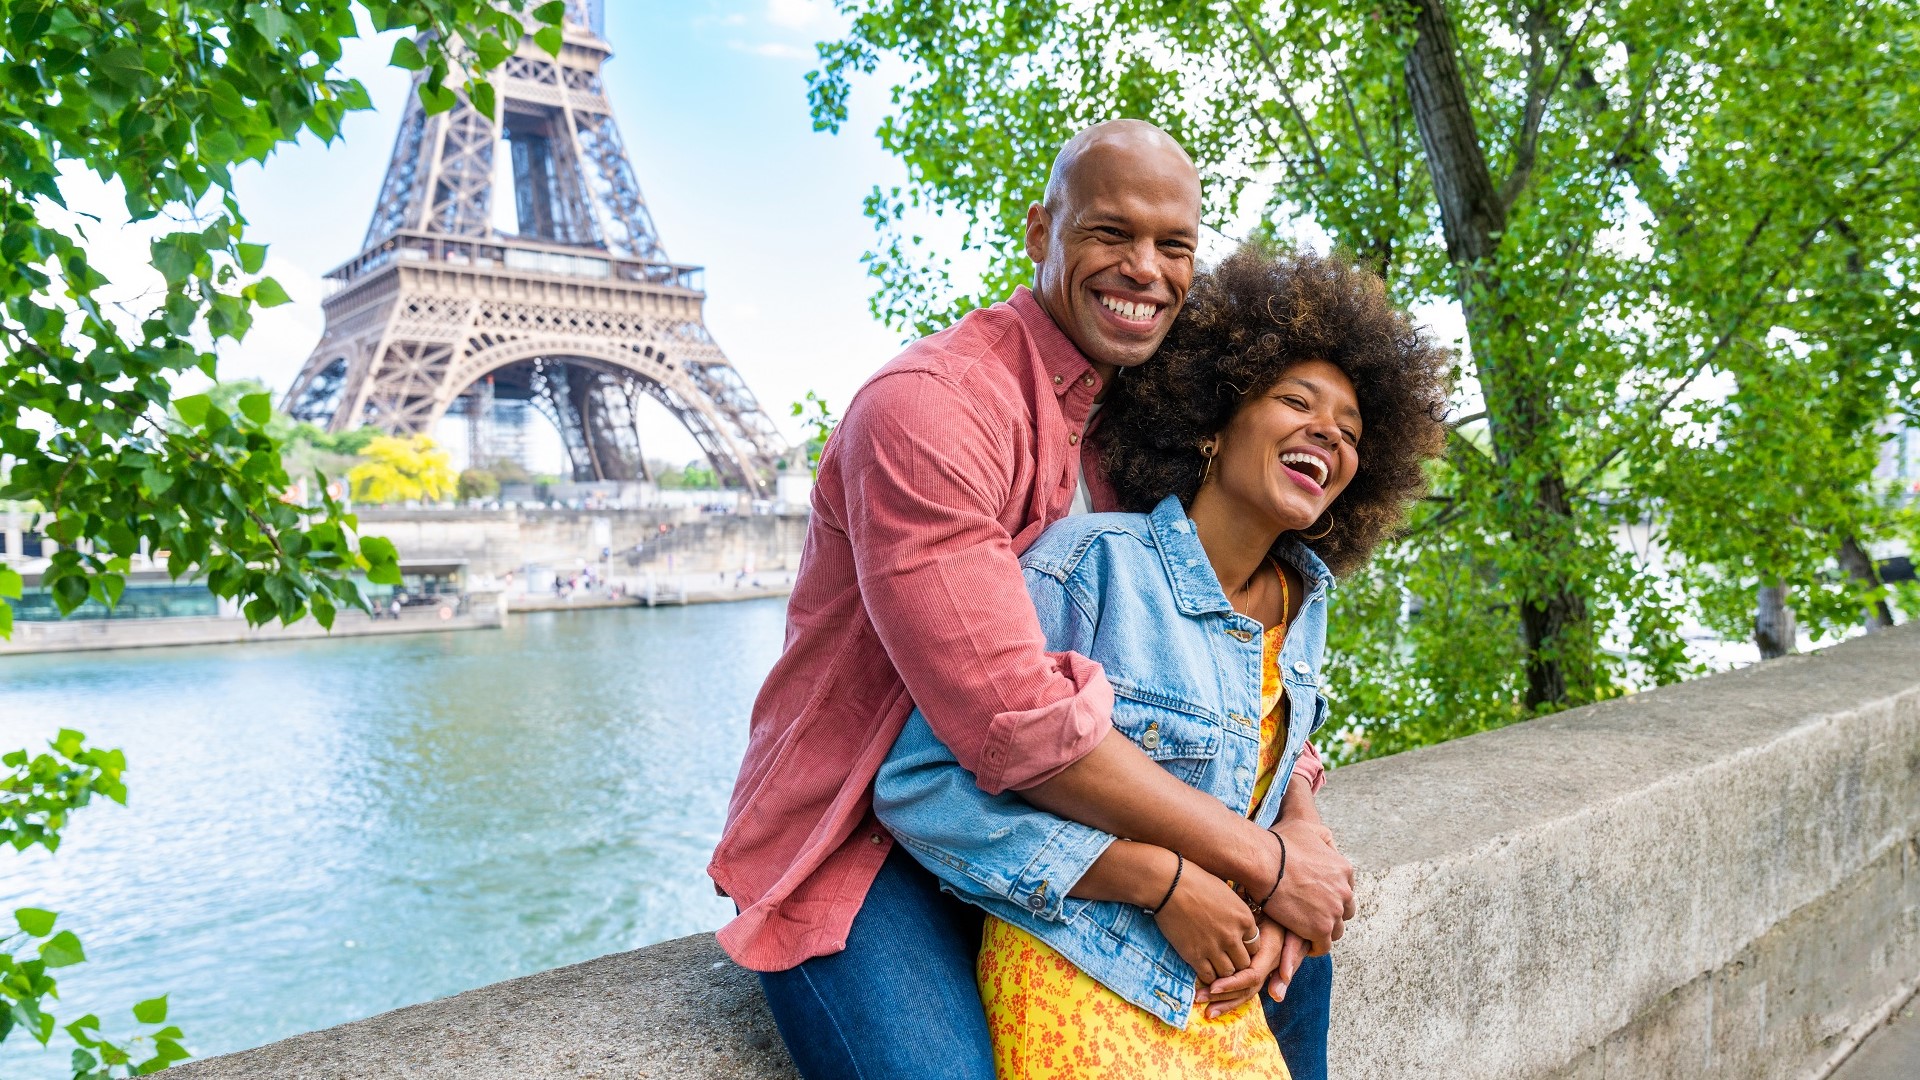 a smiling, hugging woman and man pose in front of the Eiffel Tower